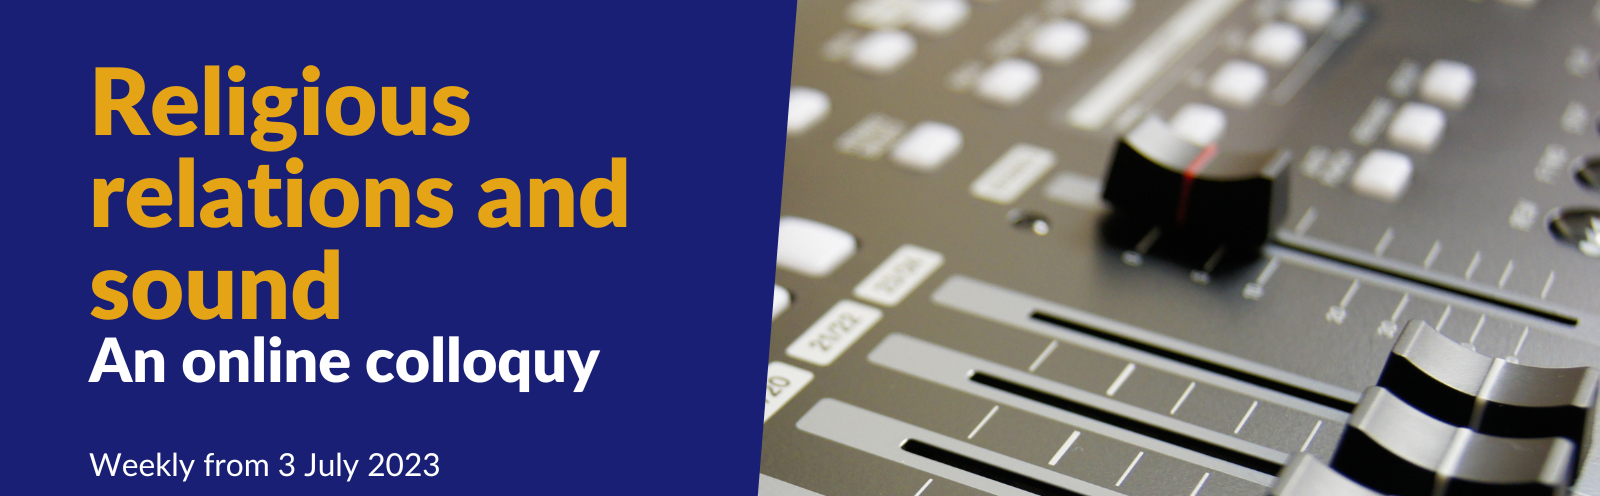 Banner for online colloquy on Religious Relations and Sound. Featured image shows buttons on a sound mixing desk.